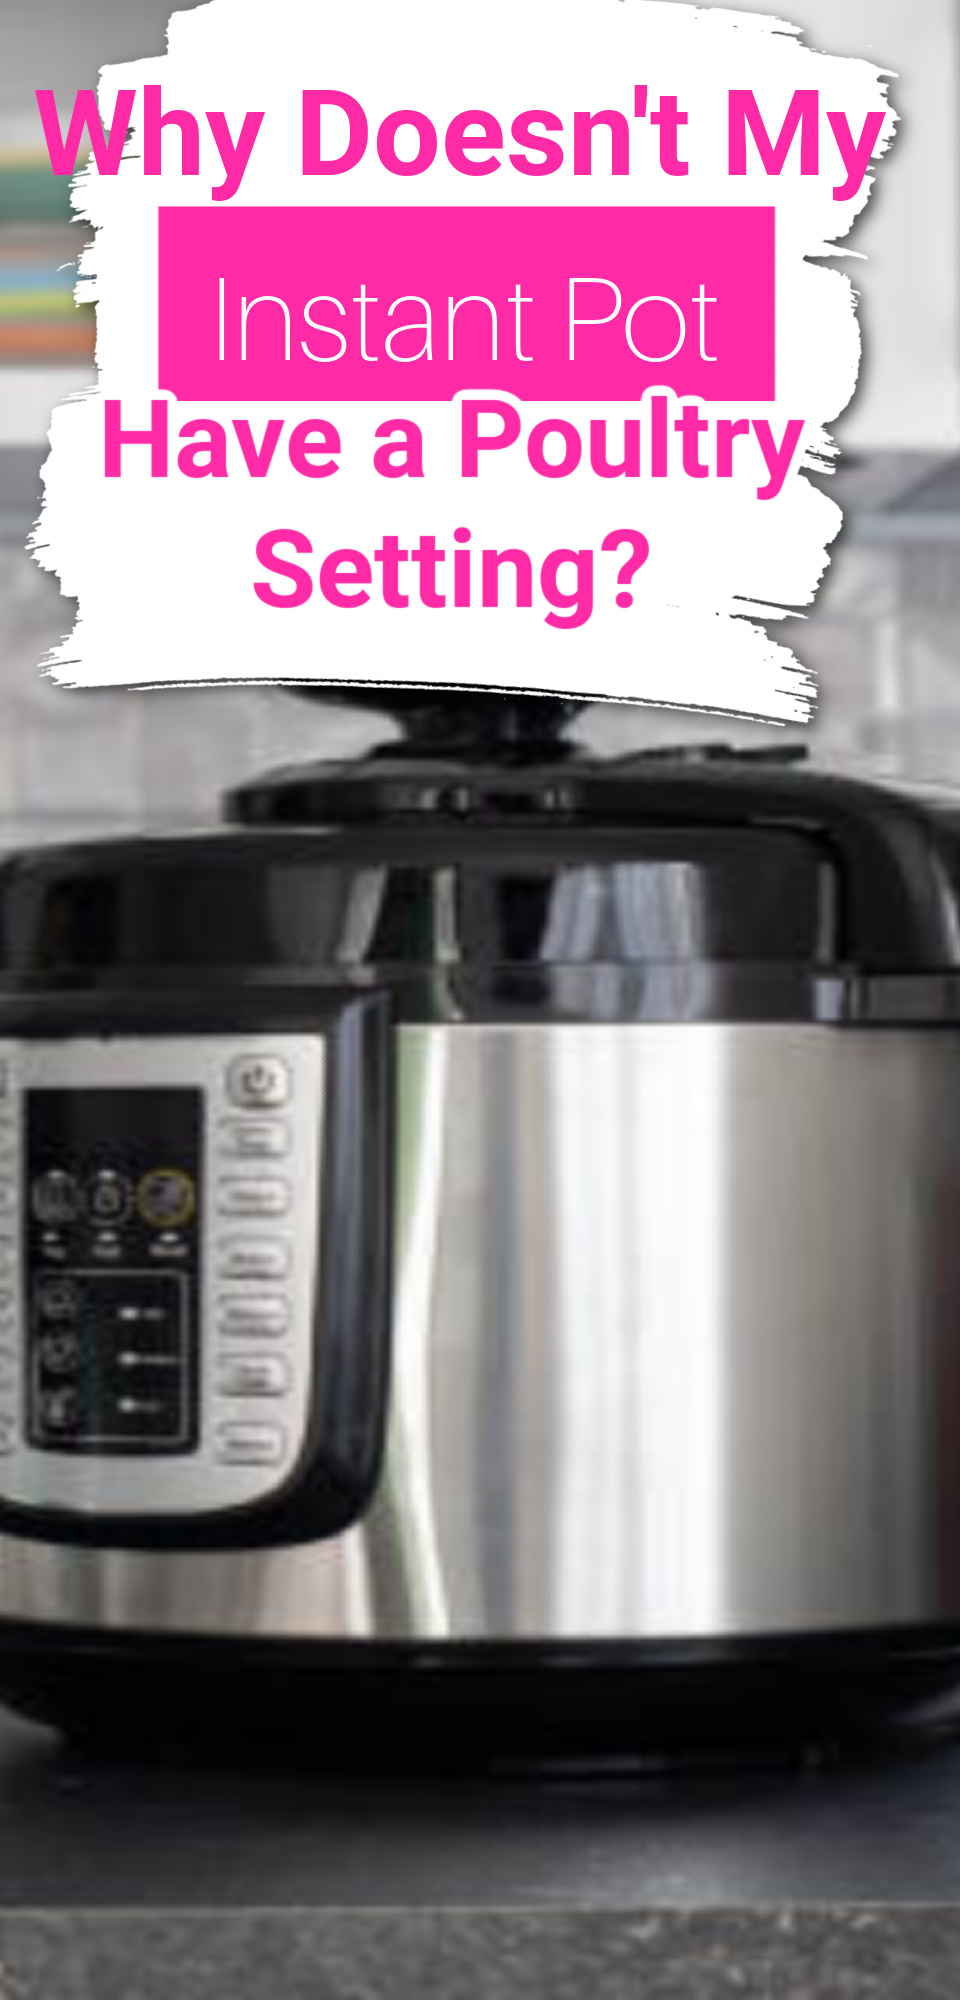 Why Doesn't My Instant Pot Have a Poultry Setting?